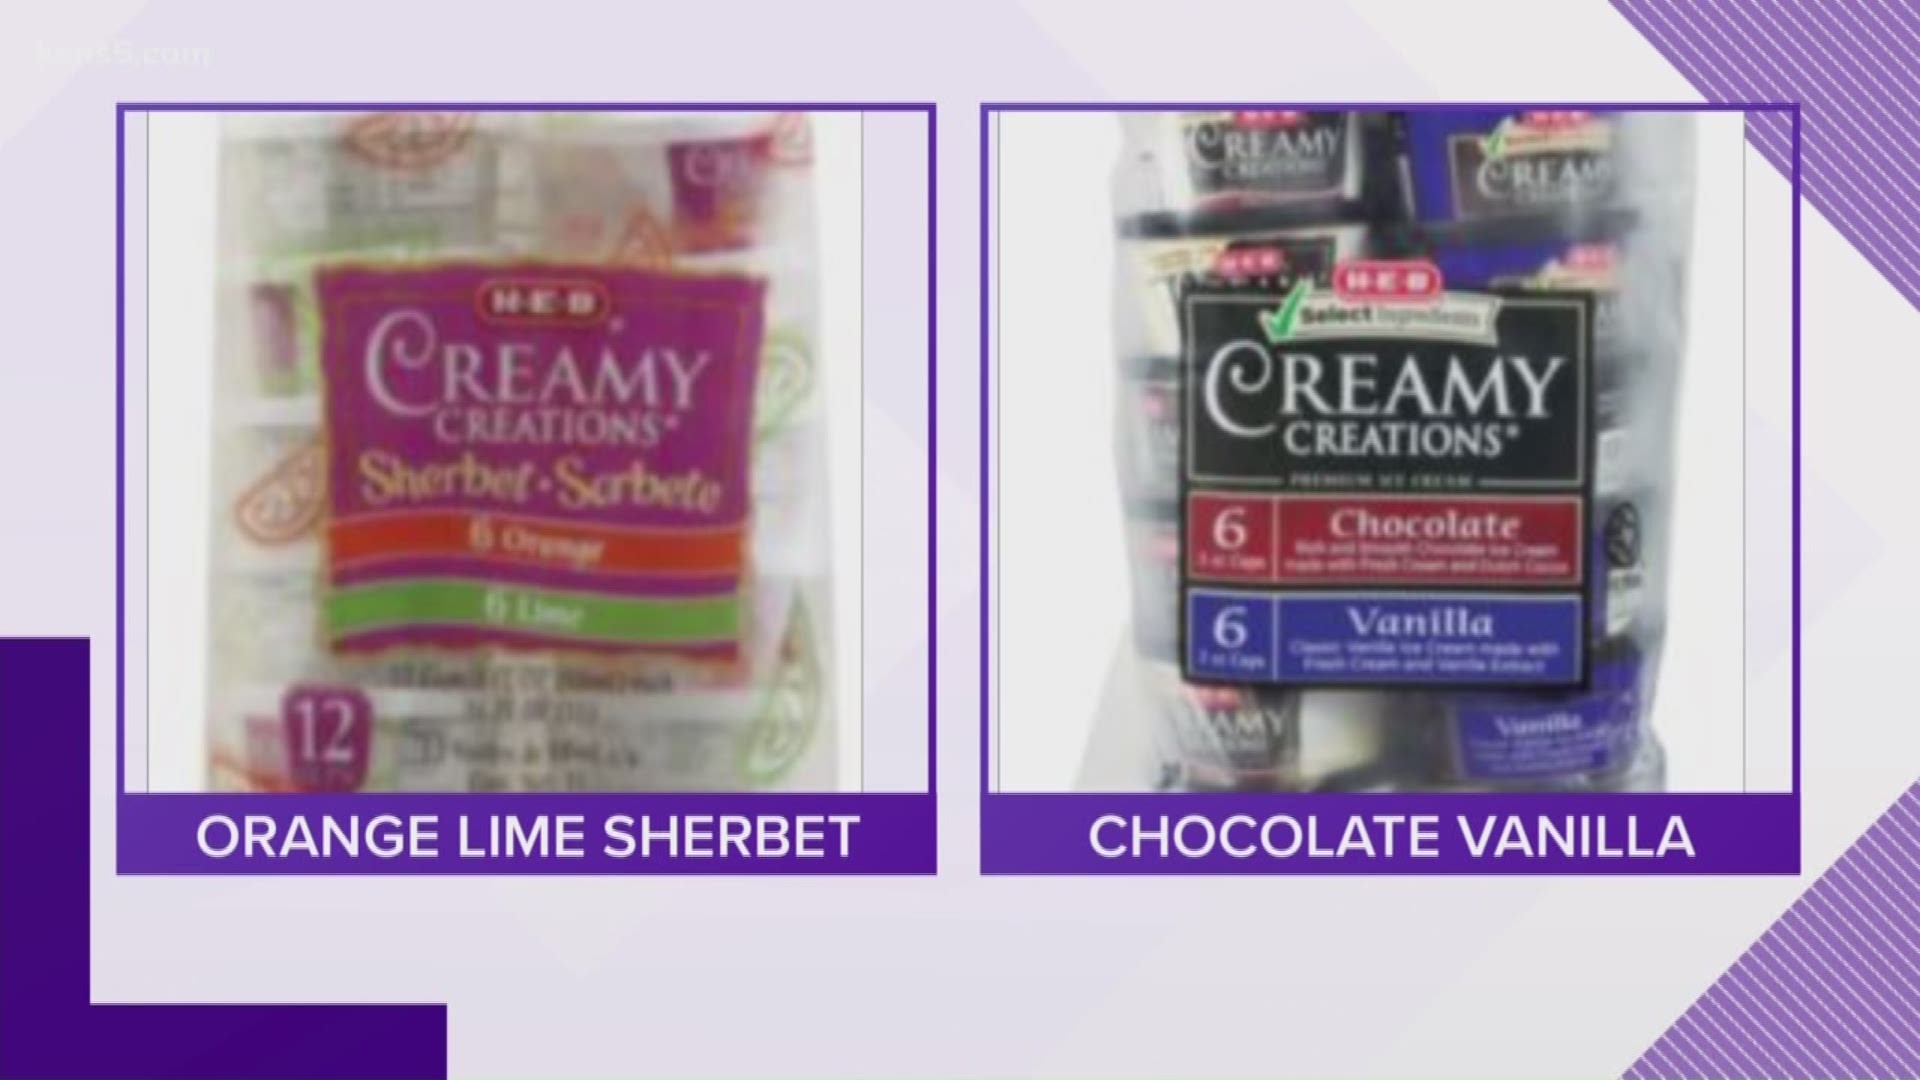 HEB issued a voluntary recall on two variety packs of Creamy Creation cups due to broken metal found in processing equipment at their production site, according to a press release sent to KENS 5.